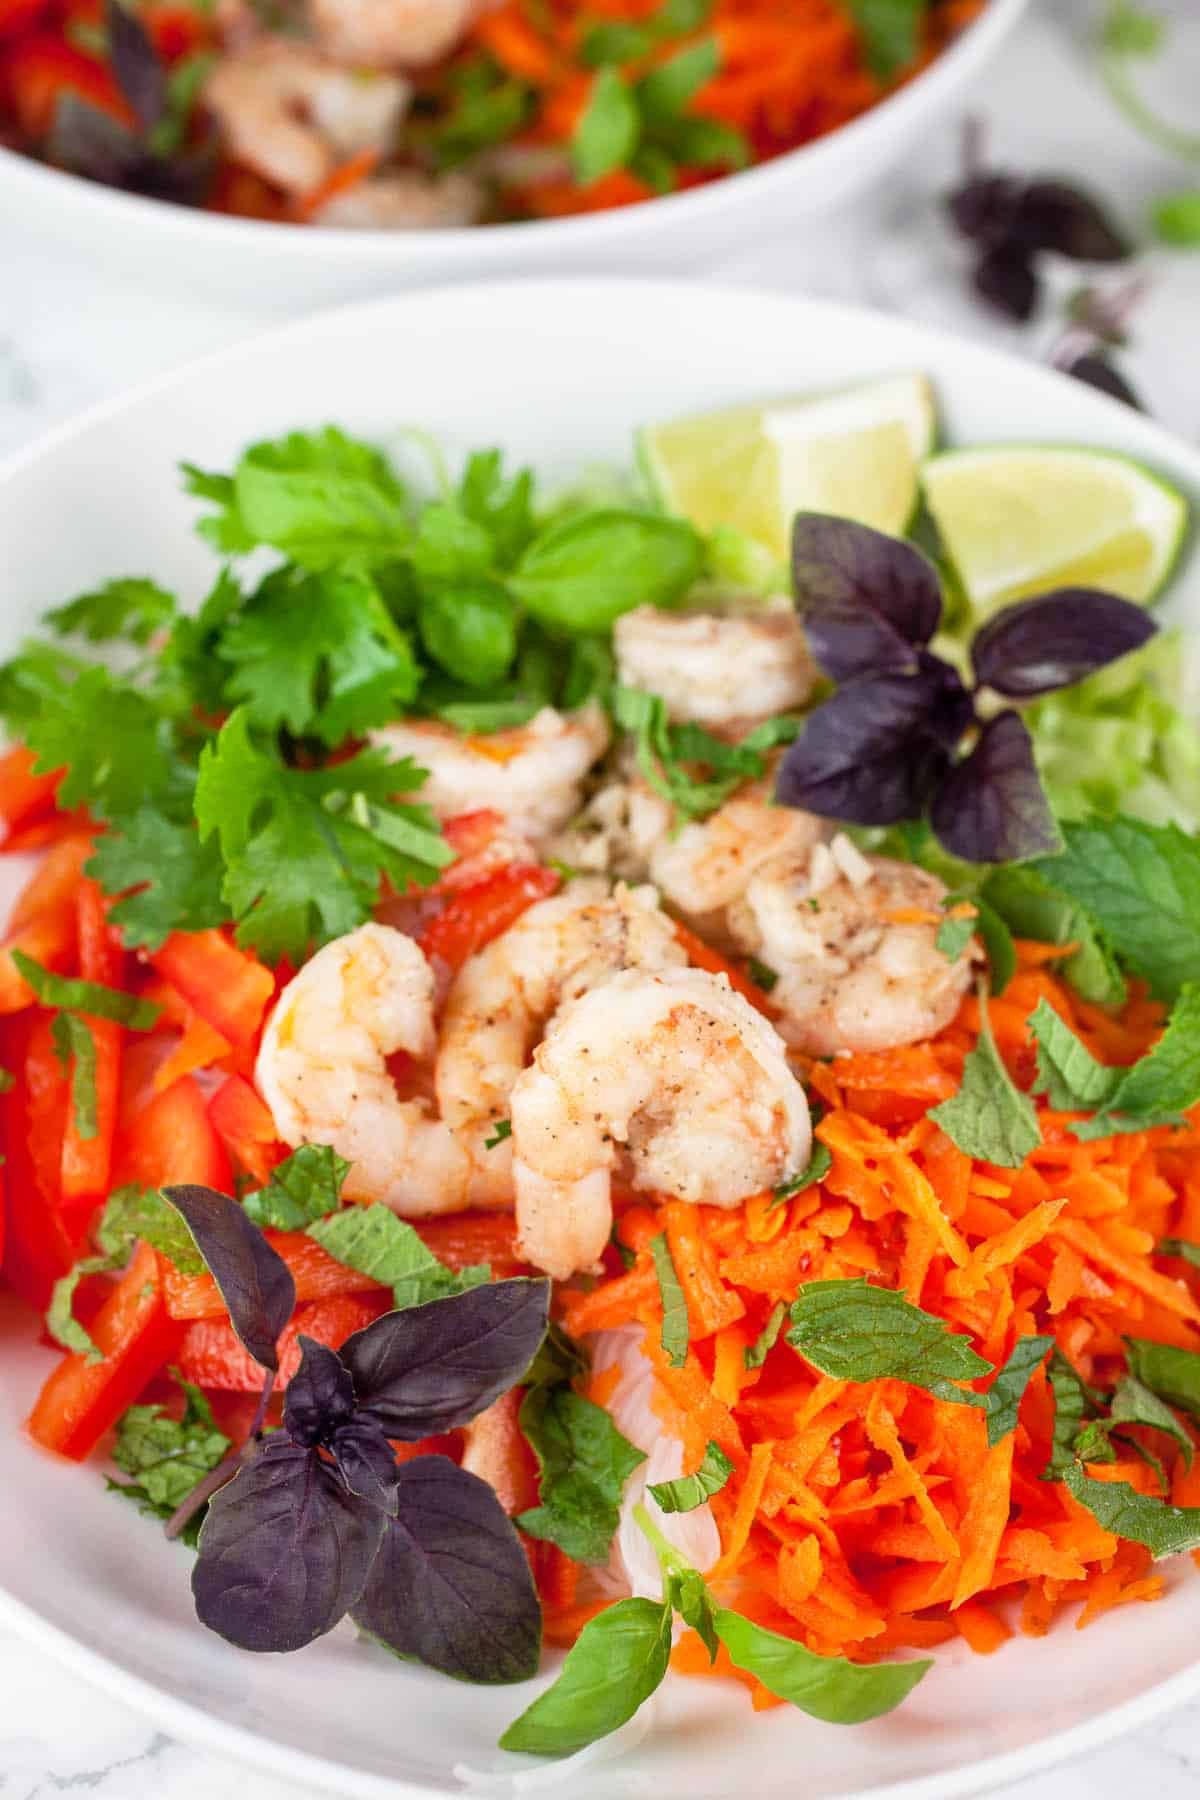 Vietnamese salad with shrimp, veggies, and herbs in white bowls.